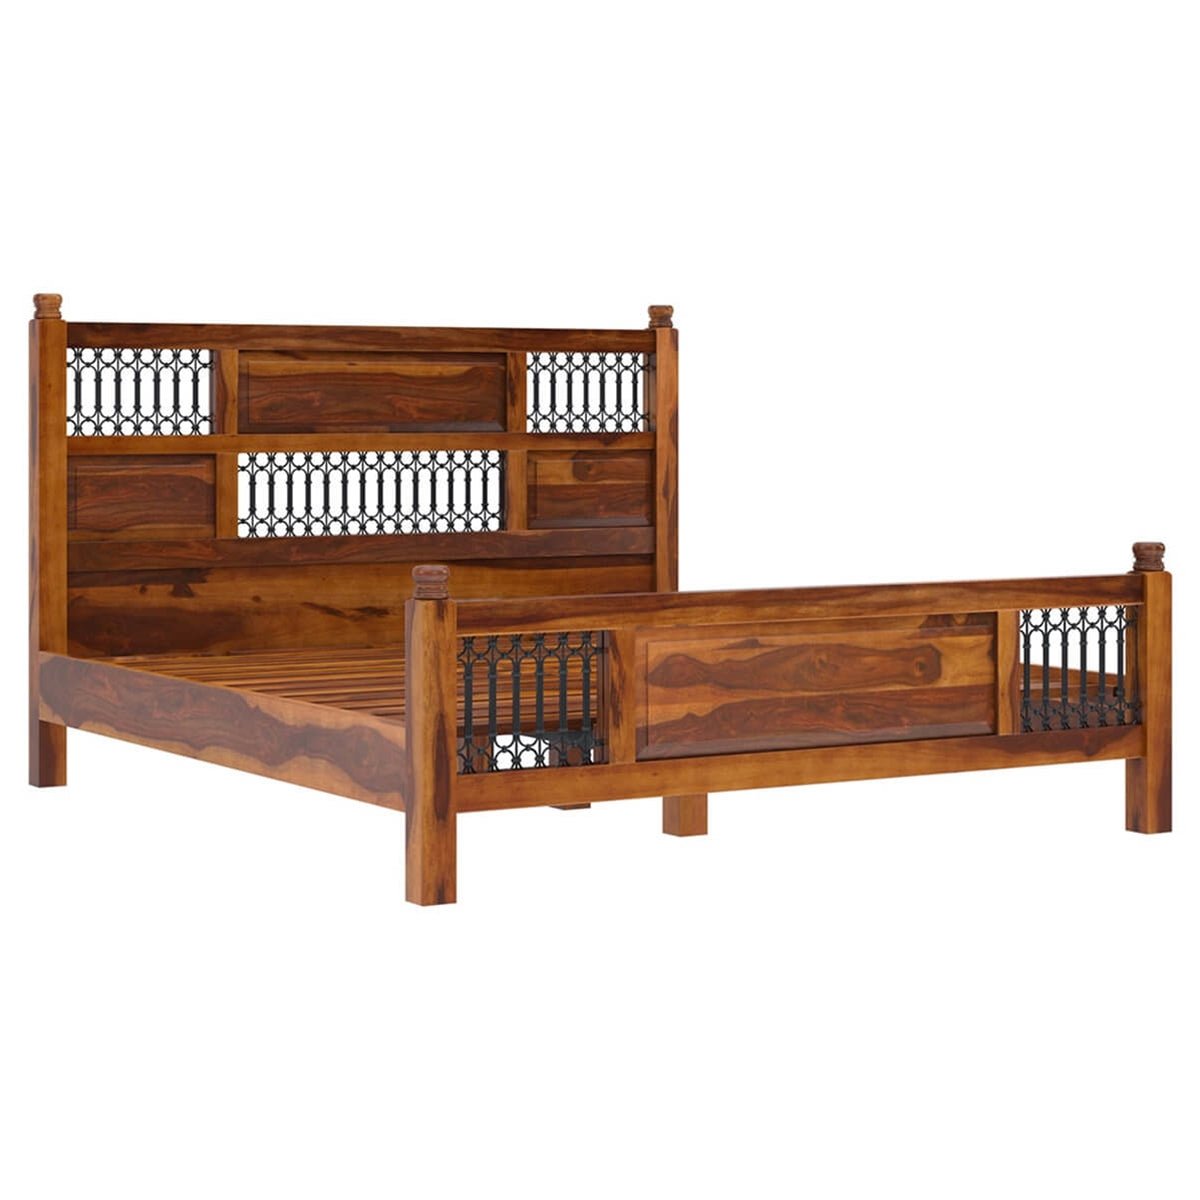 Birmingham Iron Grill Fitted Rustic Solid Wood Platform Bed Frame